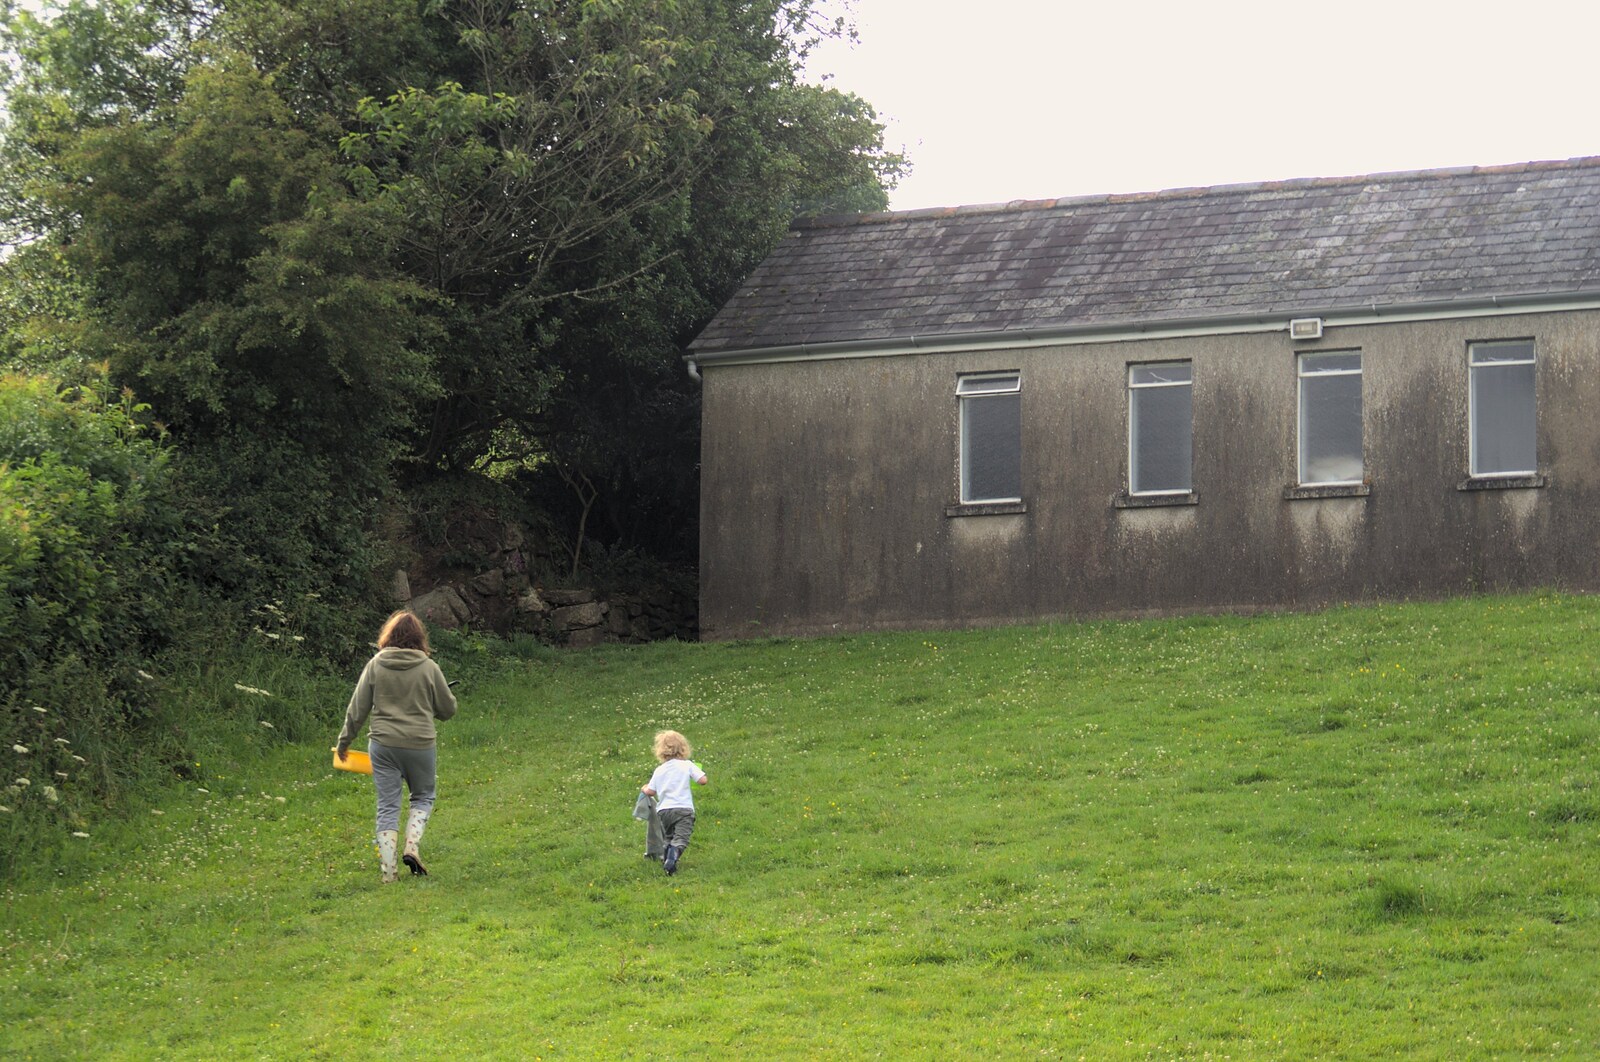 Isobel and Fred head up to the facilities from A Camper Van Odyssey: Charmouth, Plymouth, Dartmoor and Bath - 20th June 2011